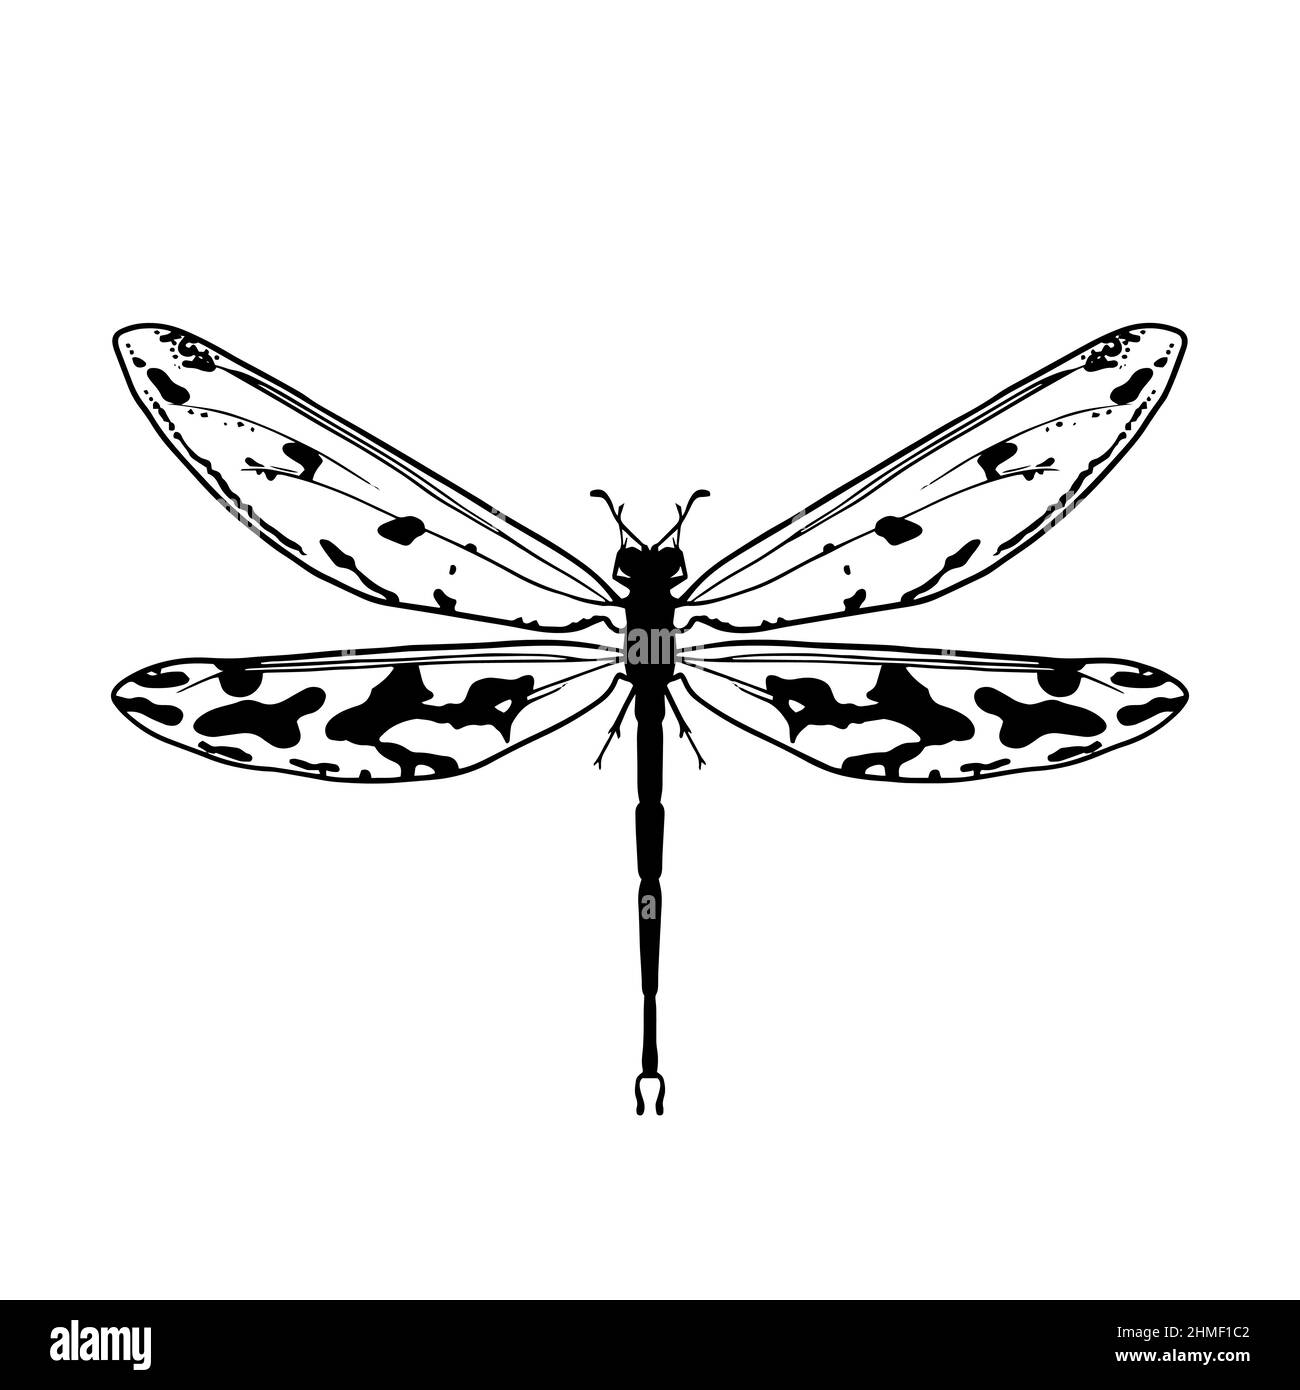 Contour drawing of a dragonfly on a white background. Doodle style. A design element. Stock Vector